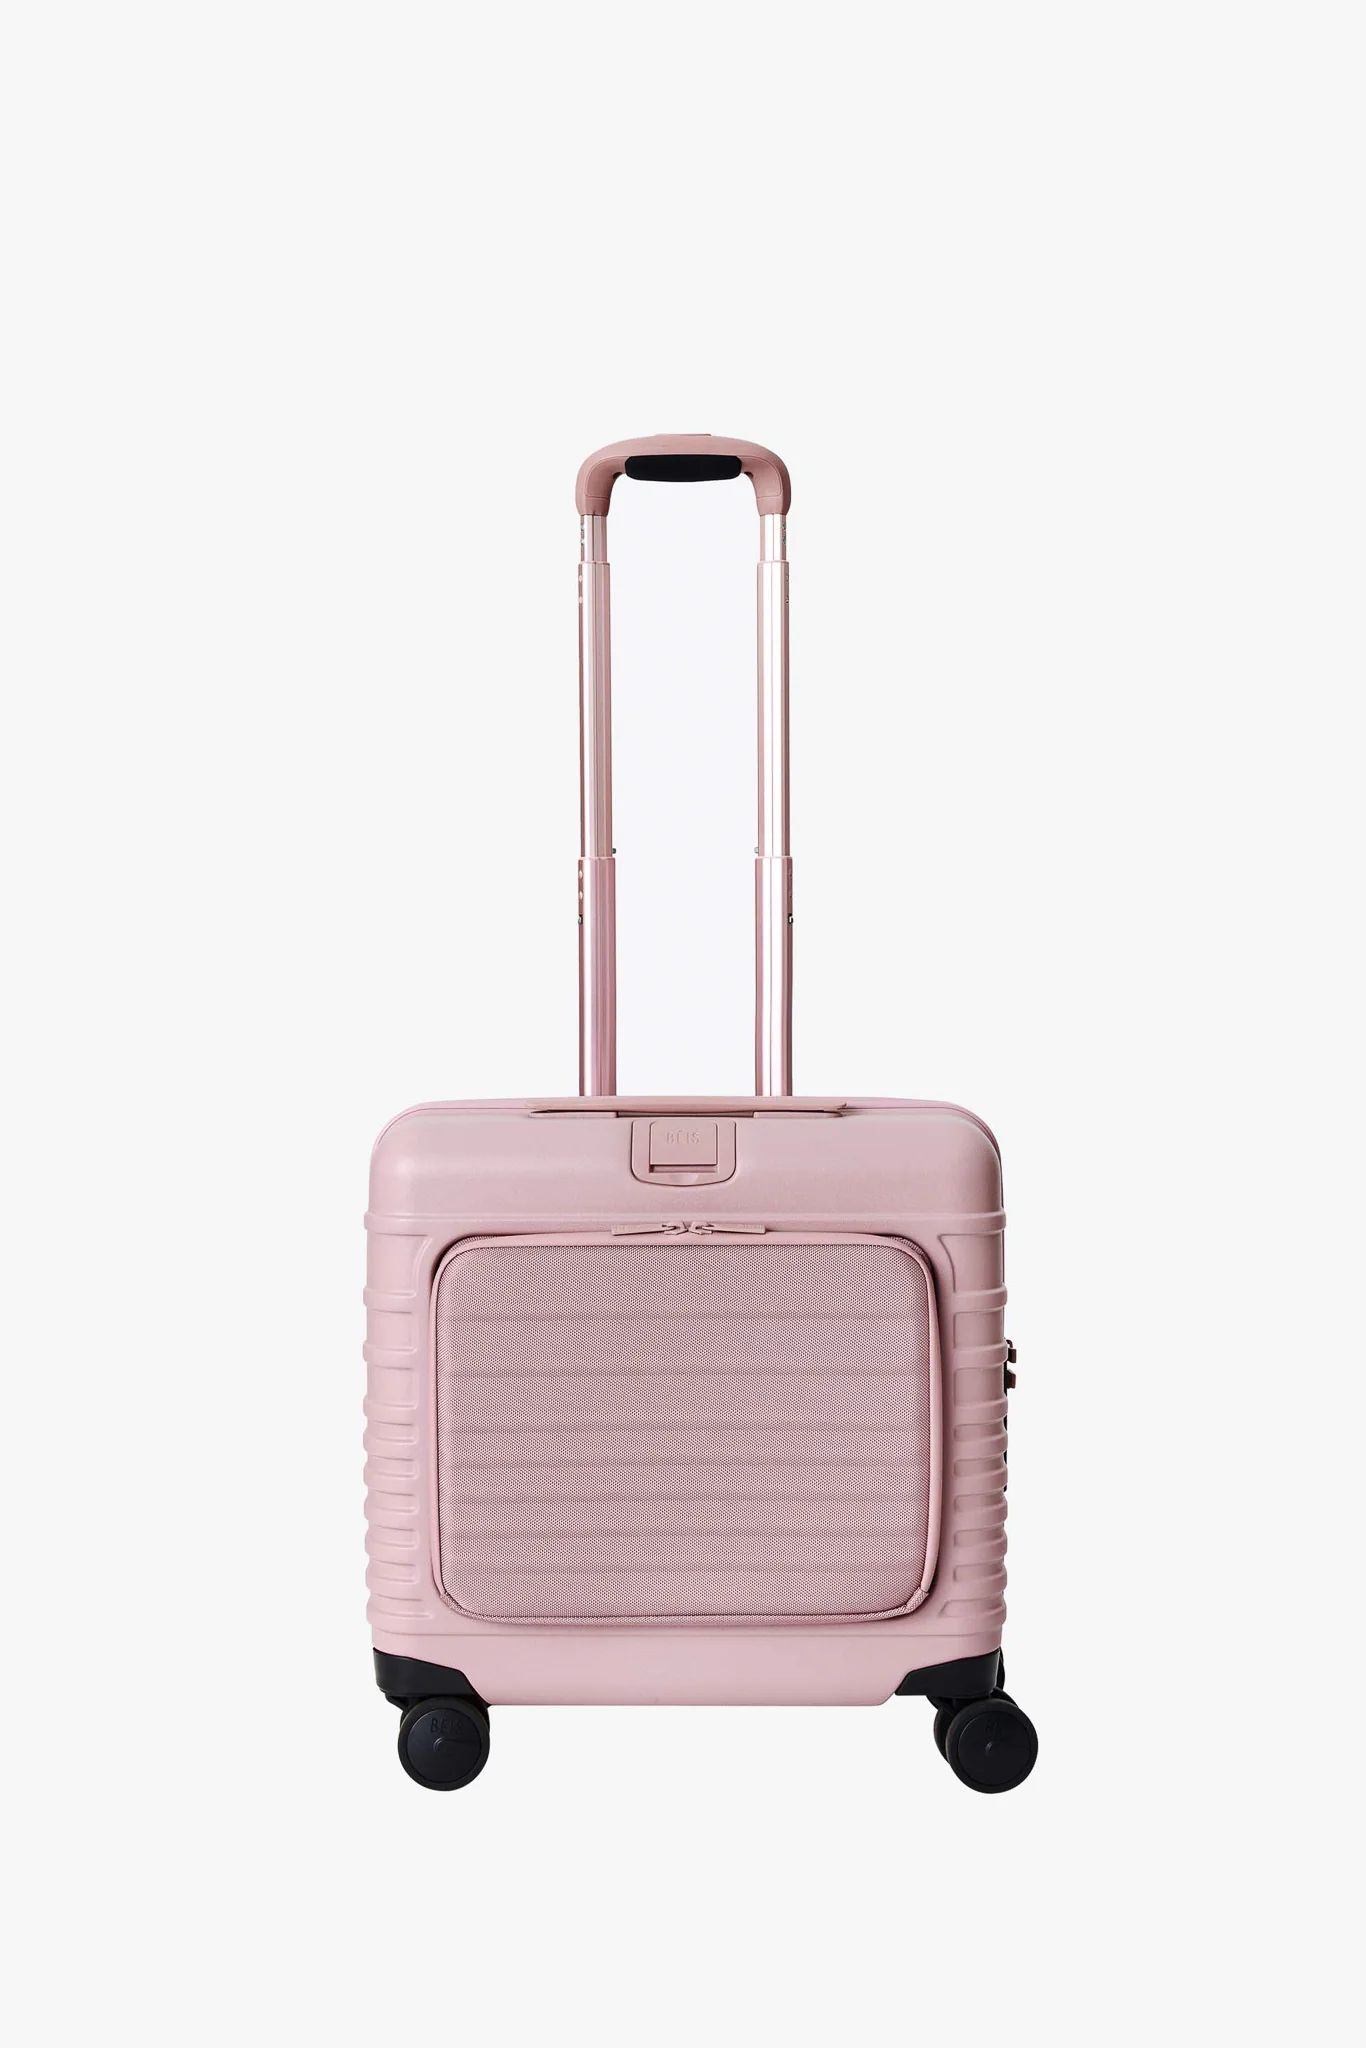 Mini Carry-OnCarry-OnMedium Check-InLarge Check-In | BÉIS Travel